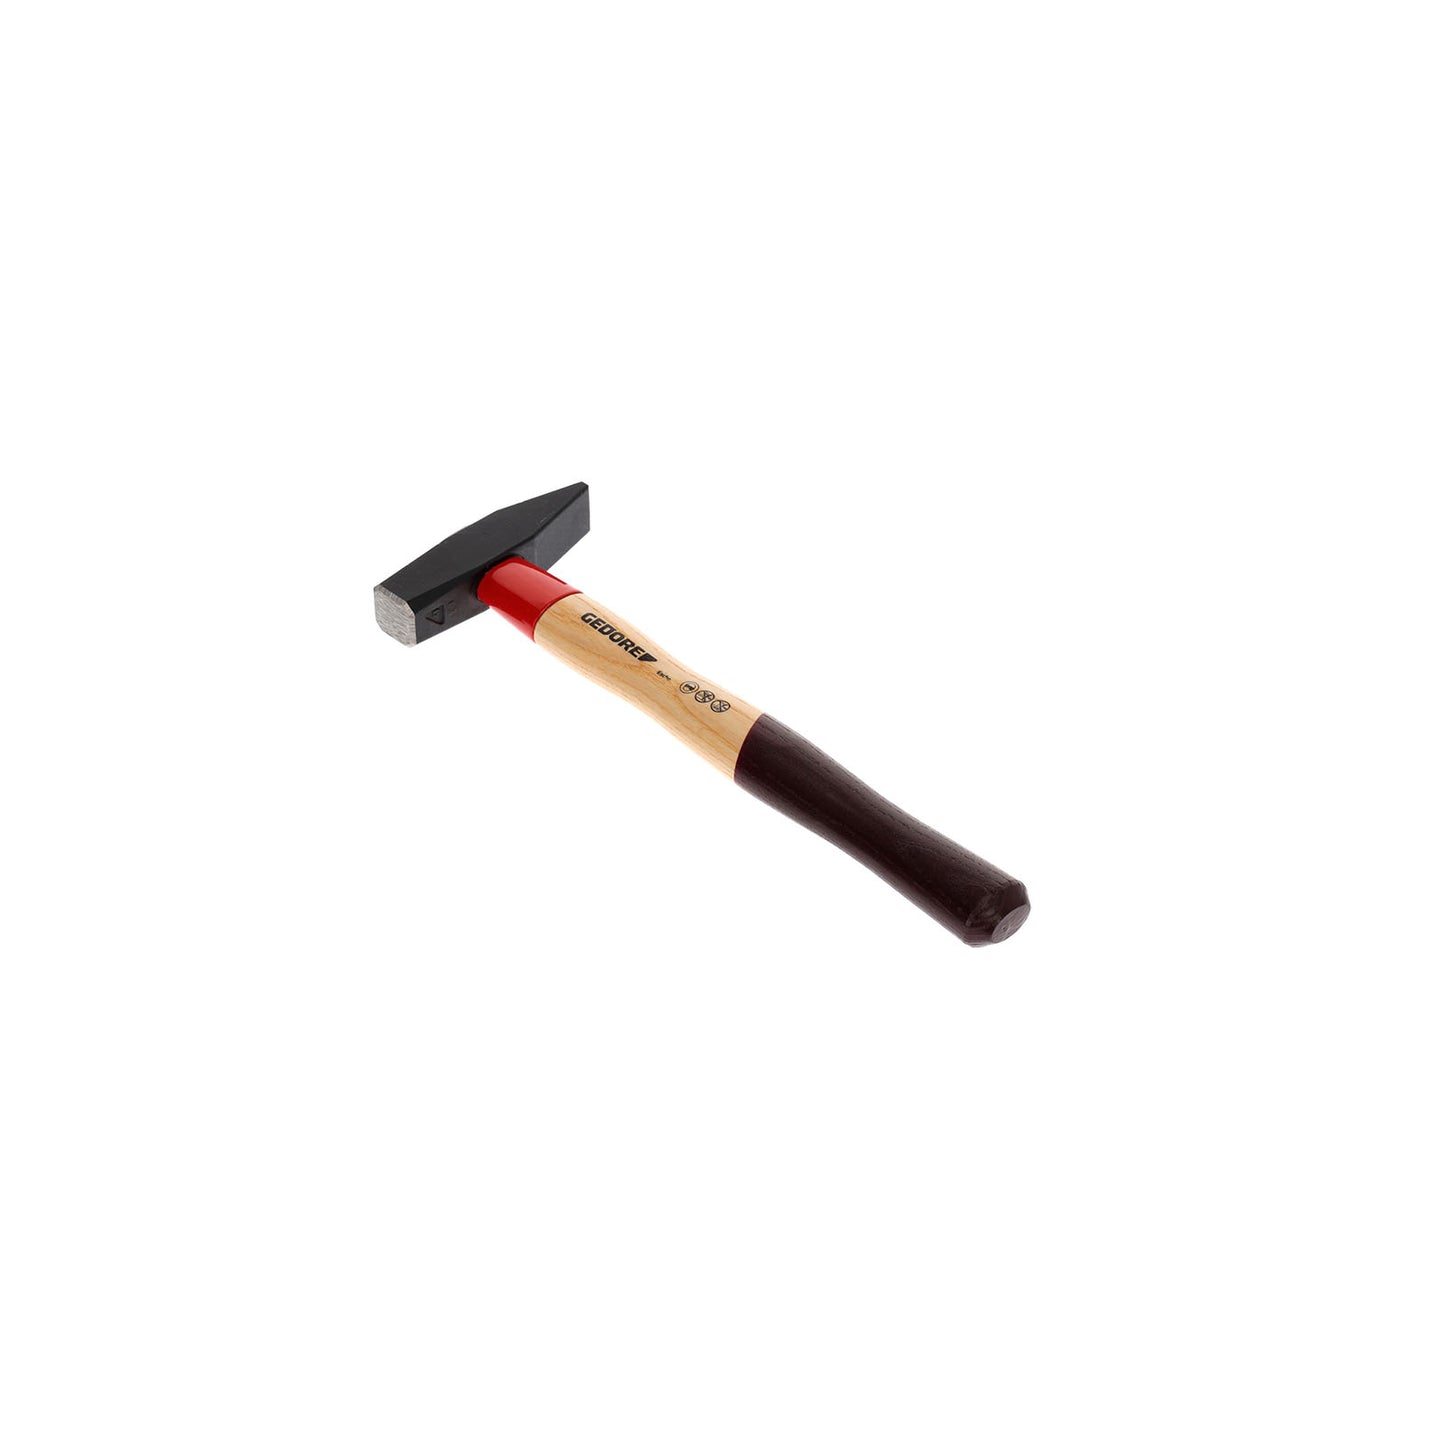 GEDORE 600 E-400 - ROTBAND assembly hammer 400g (8582180)